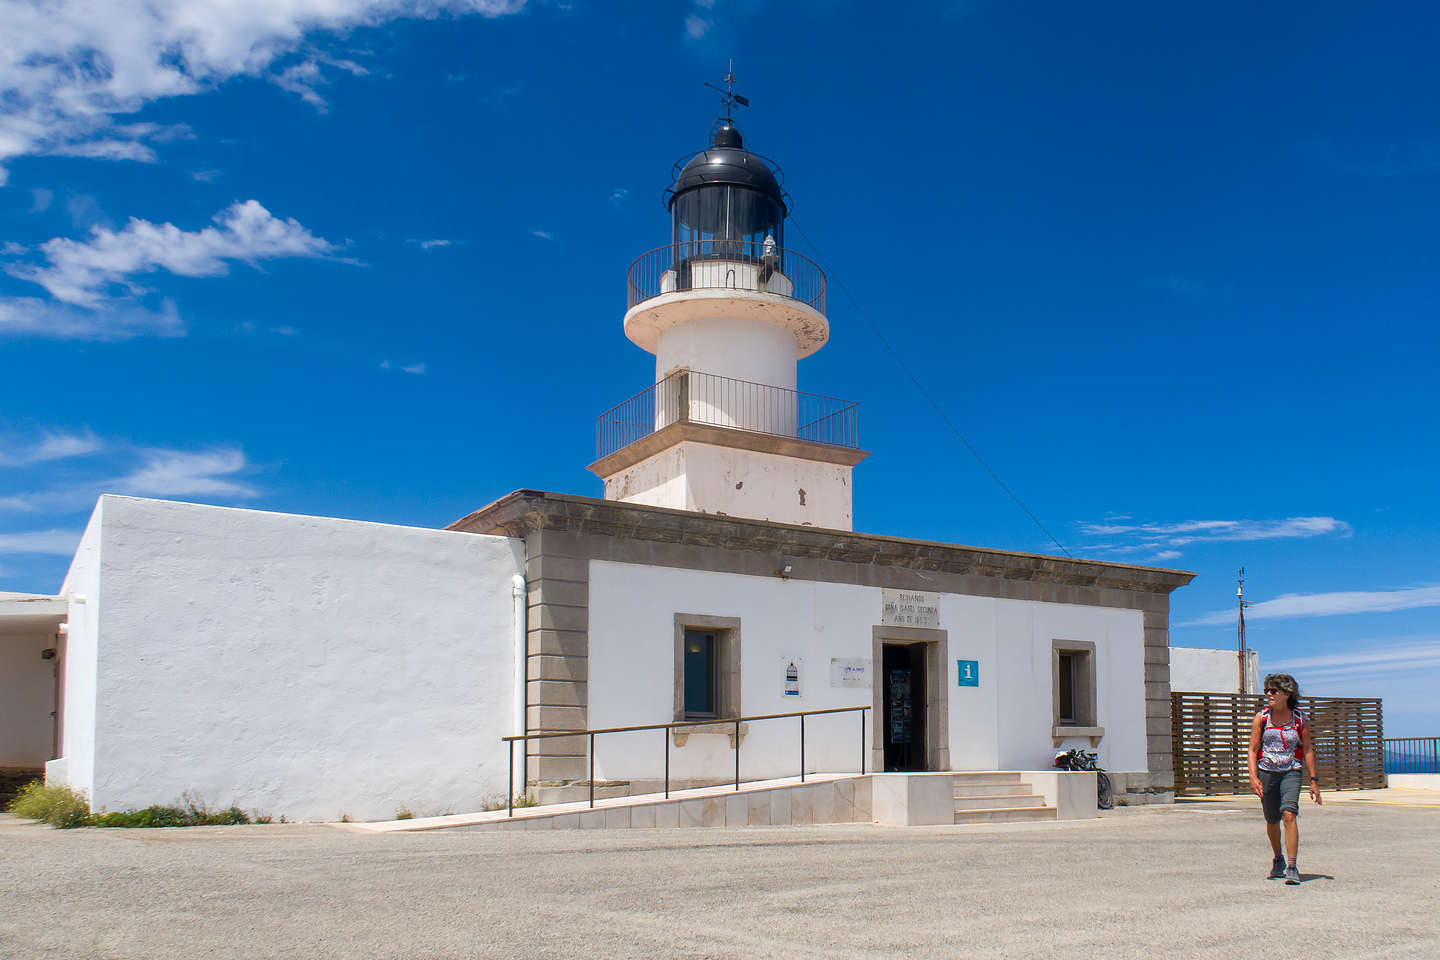 The Cap de Creus lighthouse - easternmost point in Spain